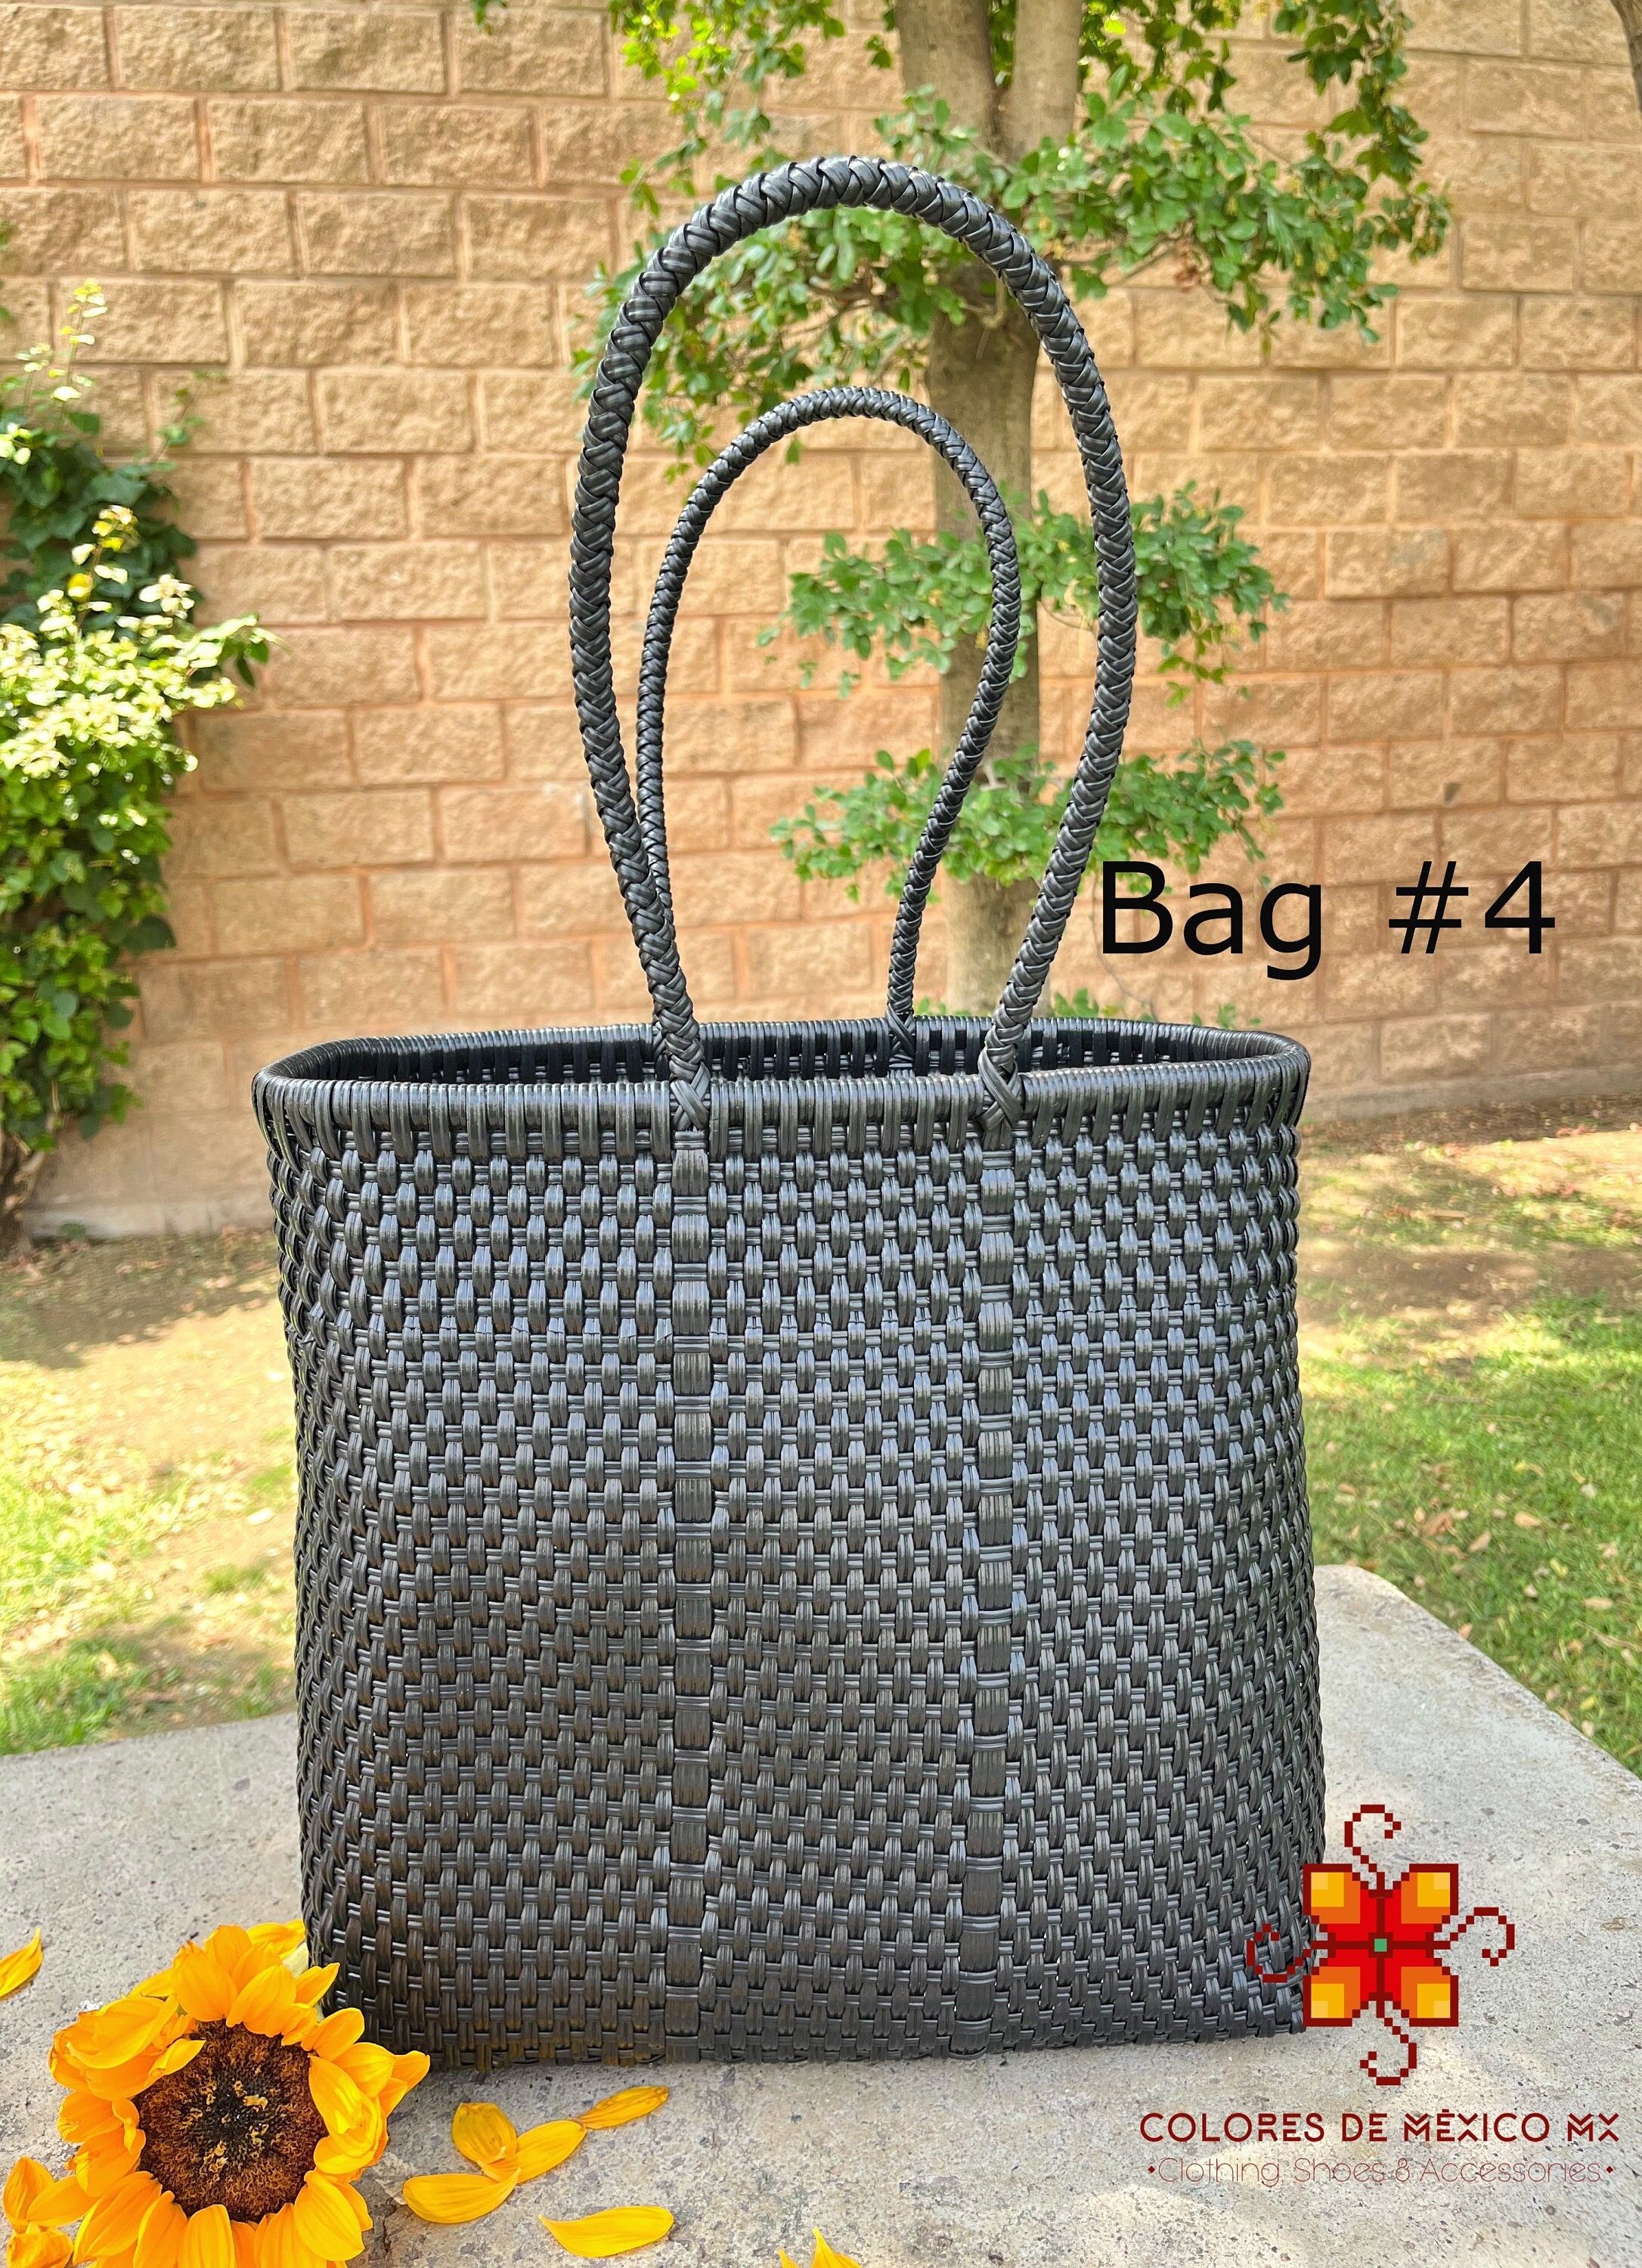 Small Handwoven Recycled Plastic Open Tote Bag – Keepin' Breezy